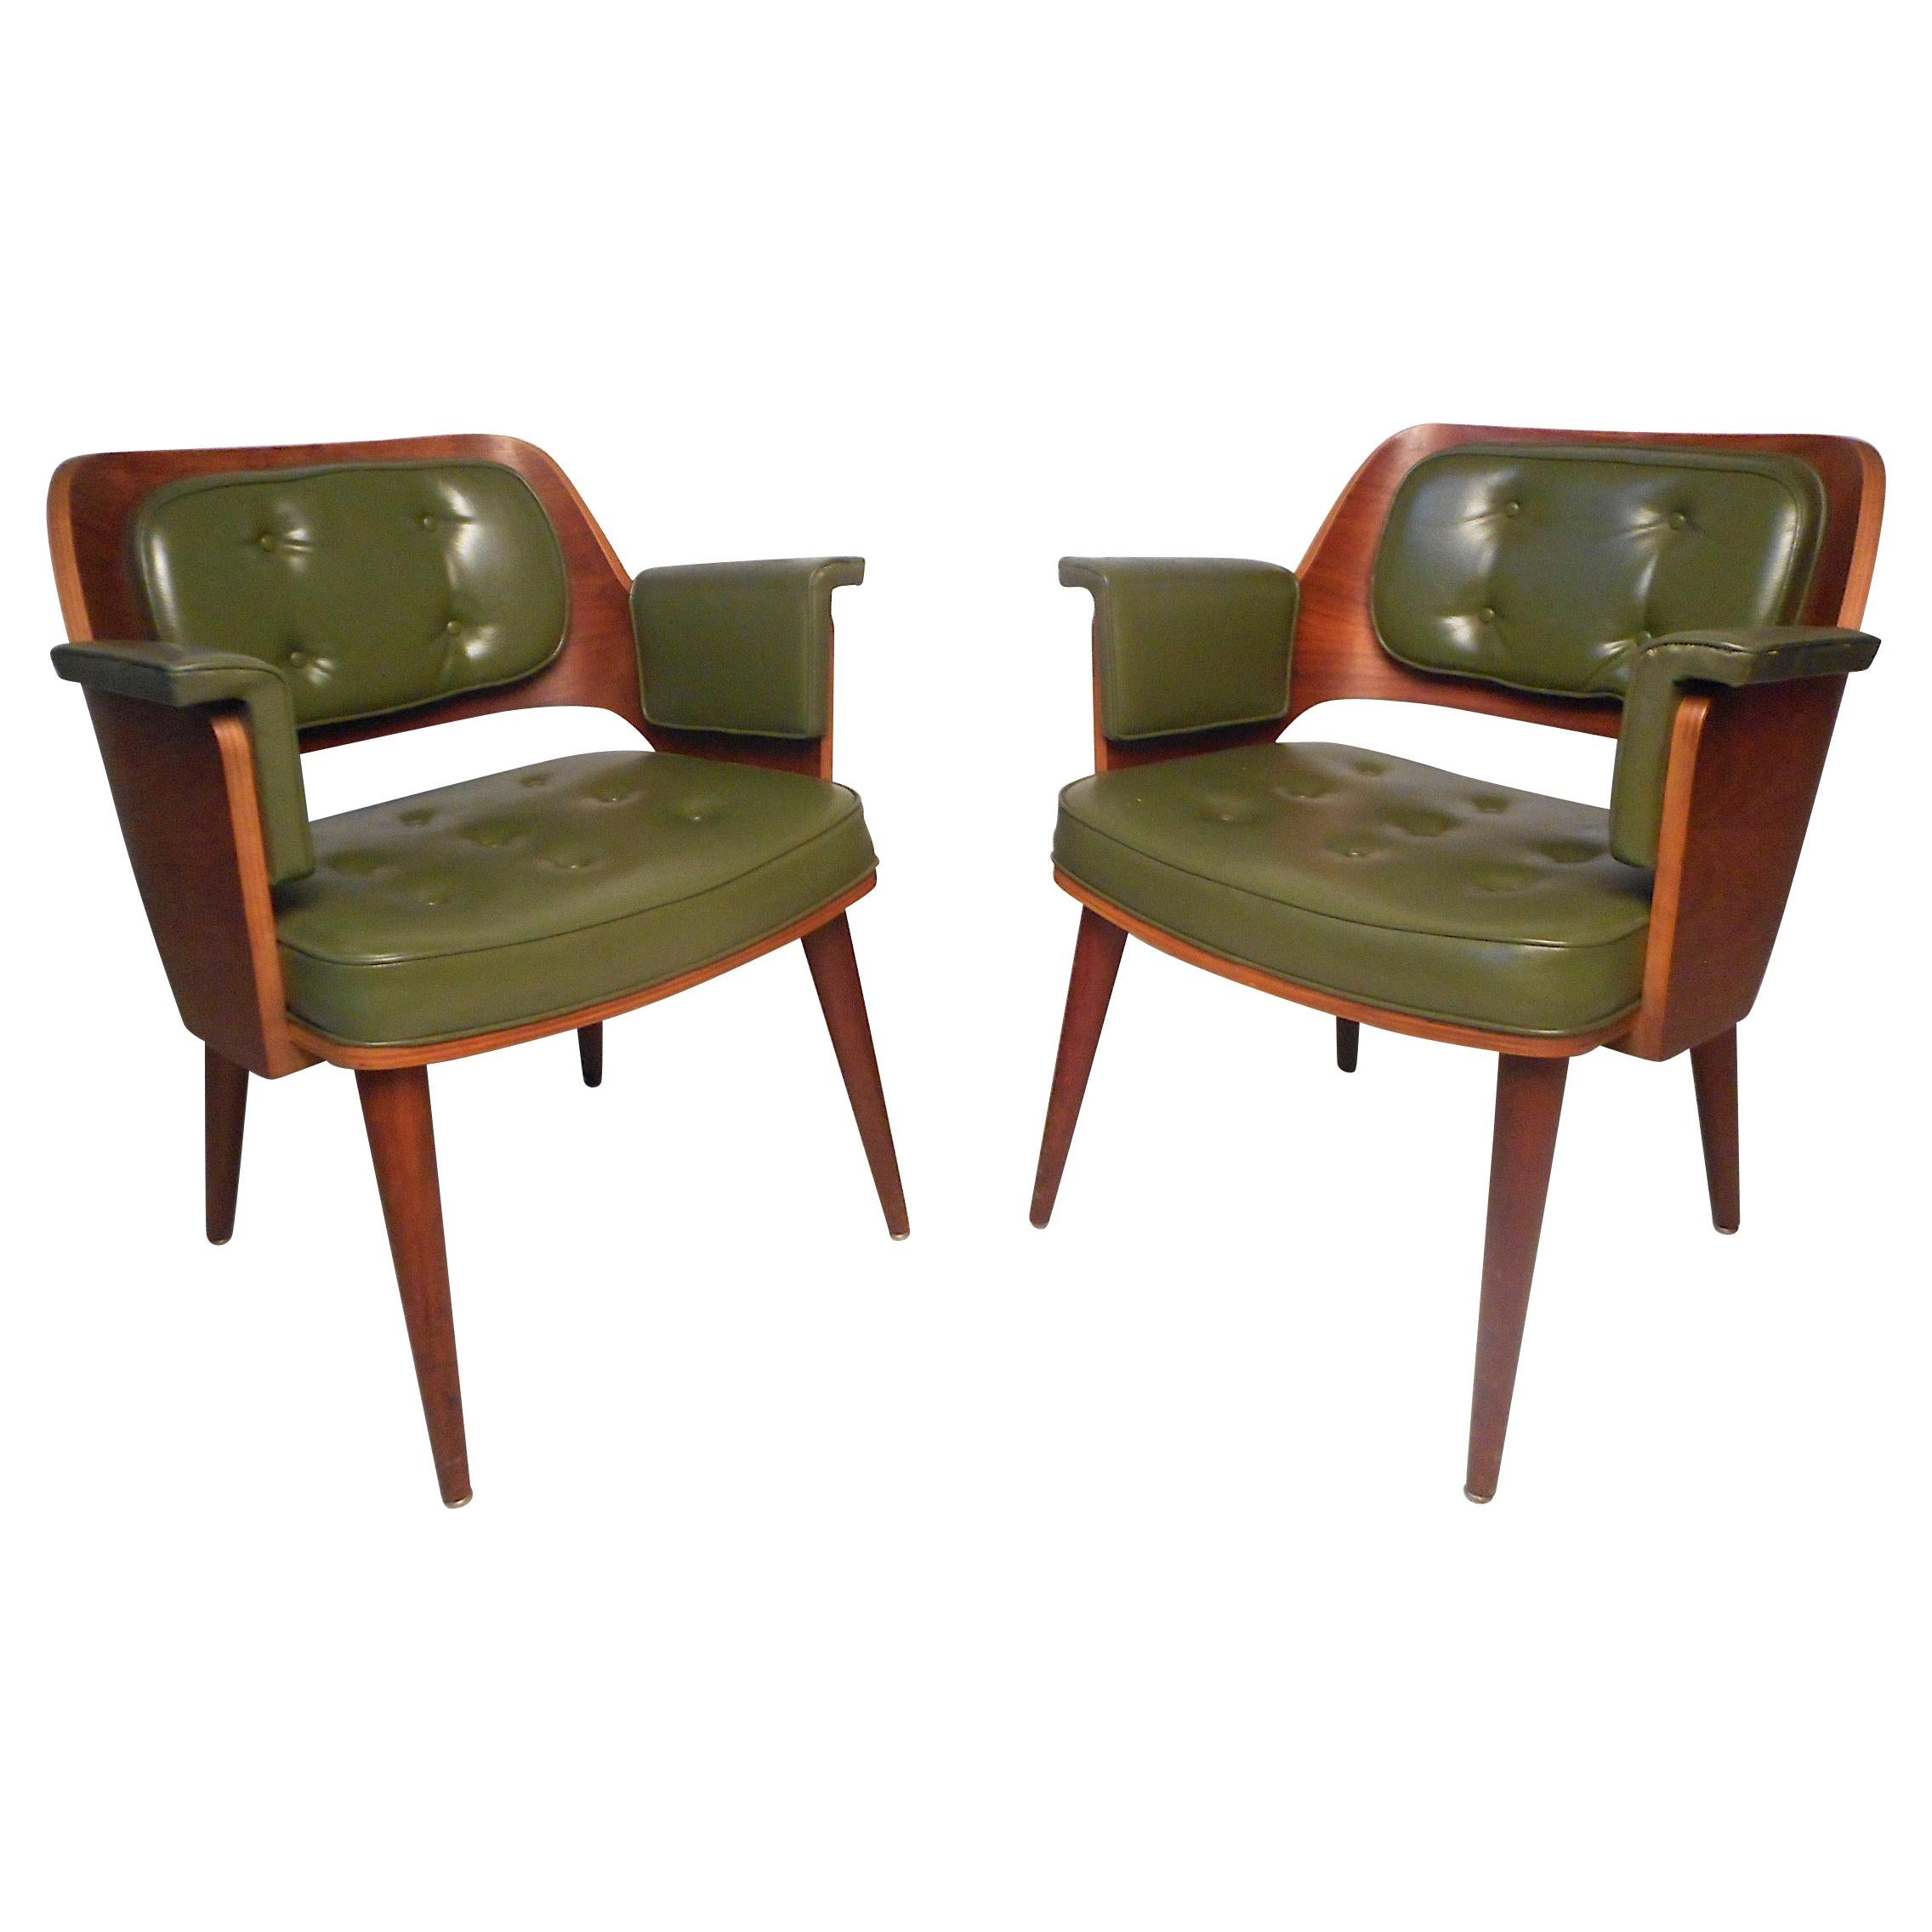 Midcentury Armchairs by Taylor Chair Co., a Pair